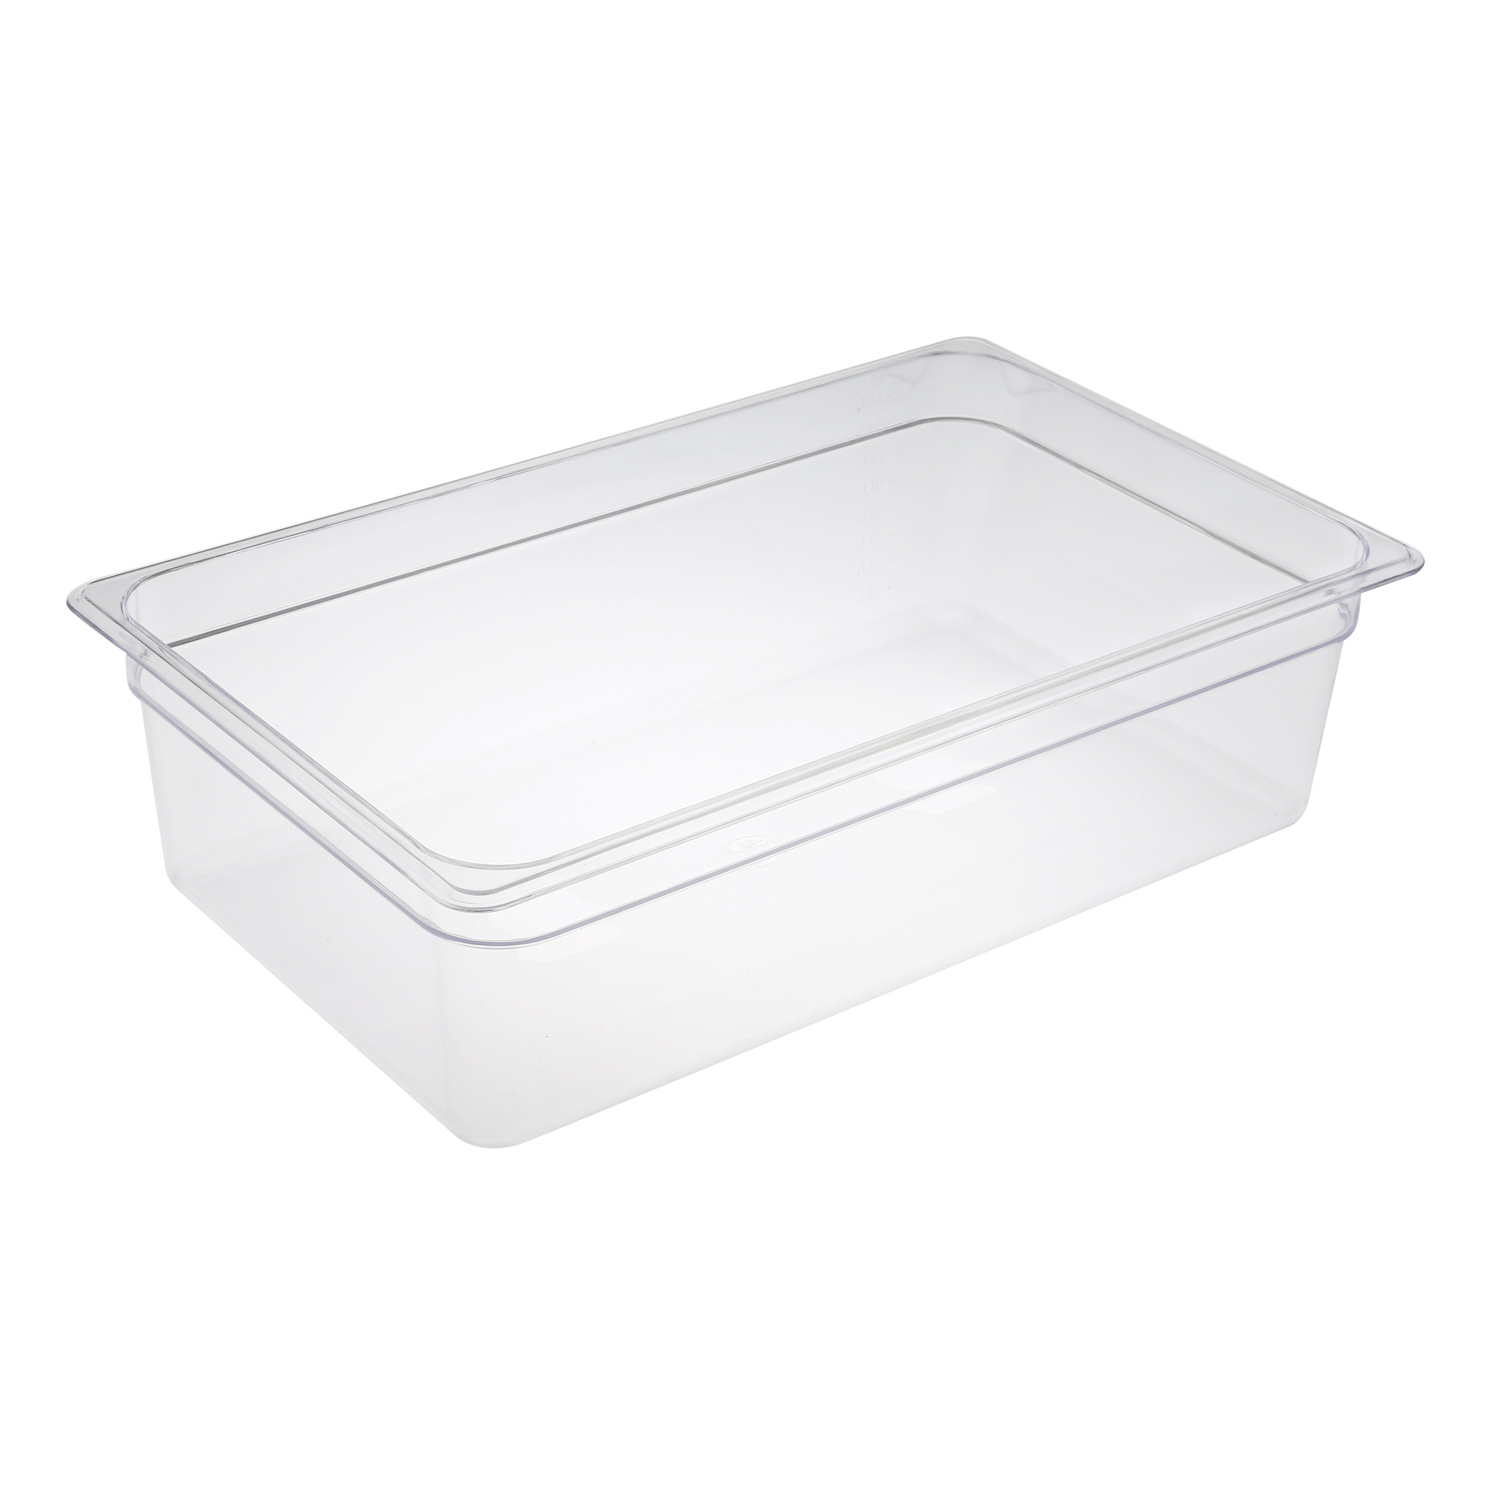 CAC China PCFP-F6 Full Size Polycarbonate Food Pan 6" Deep